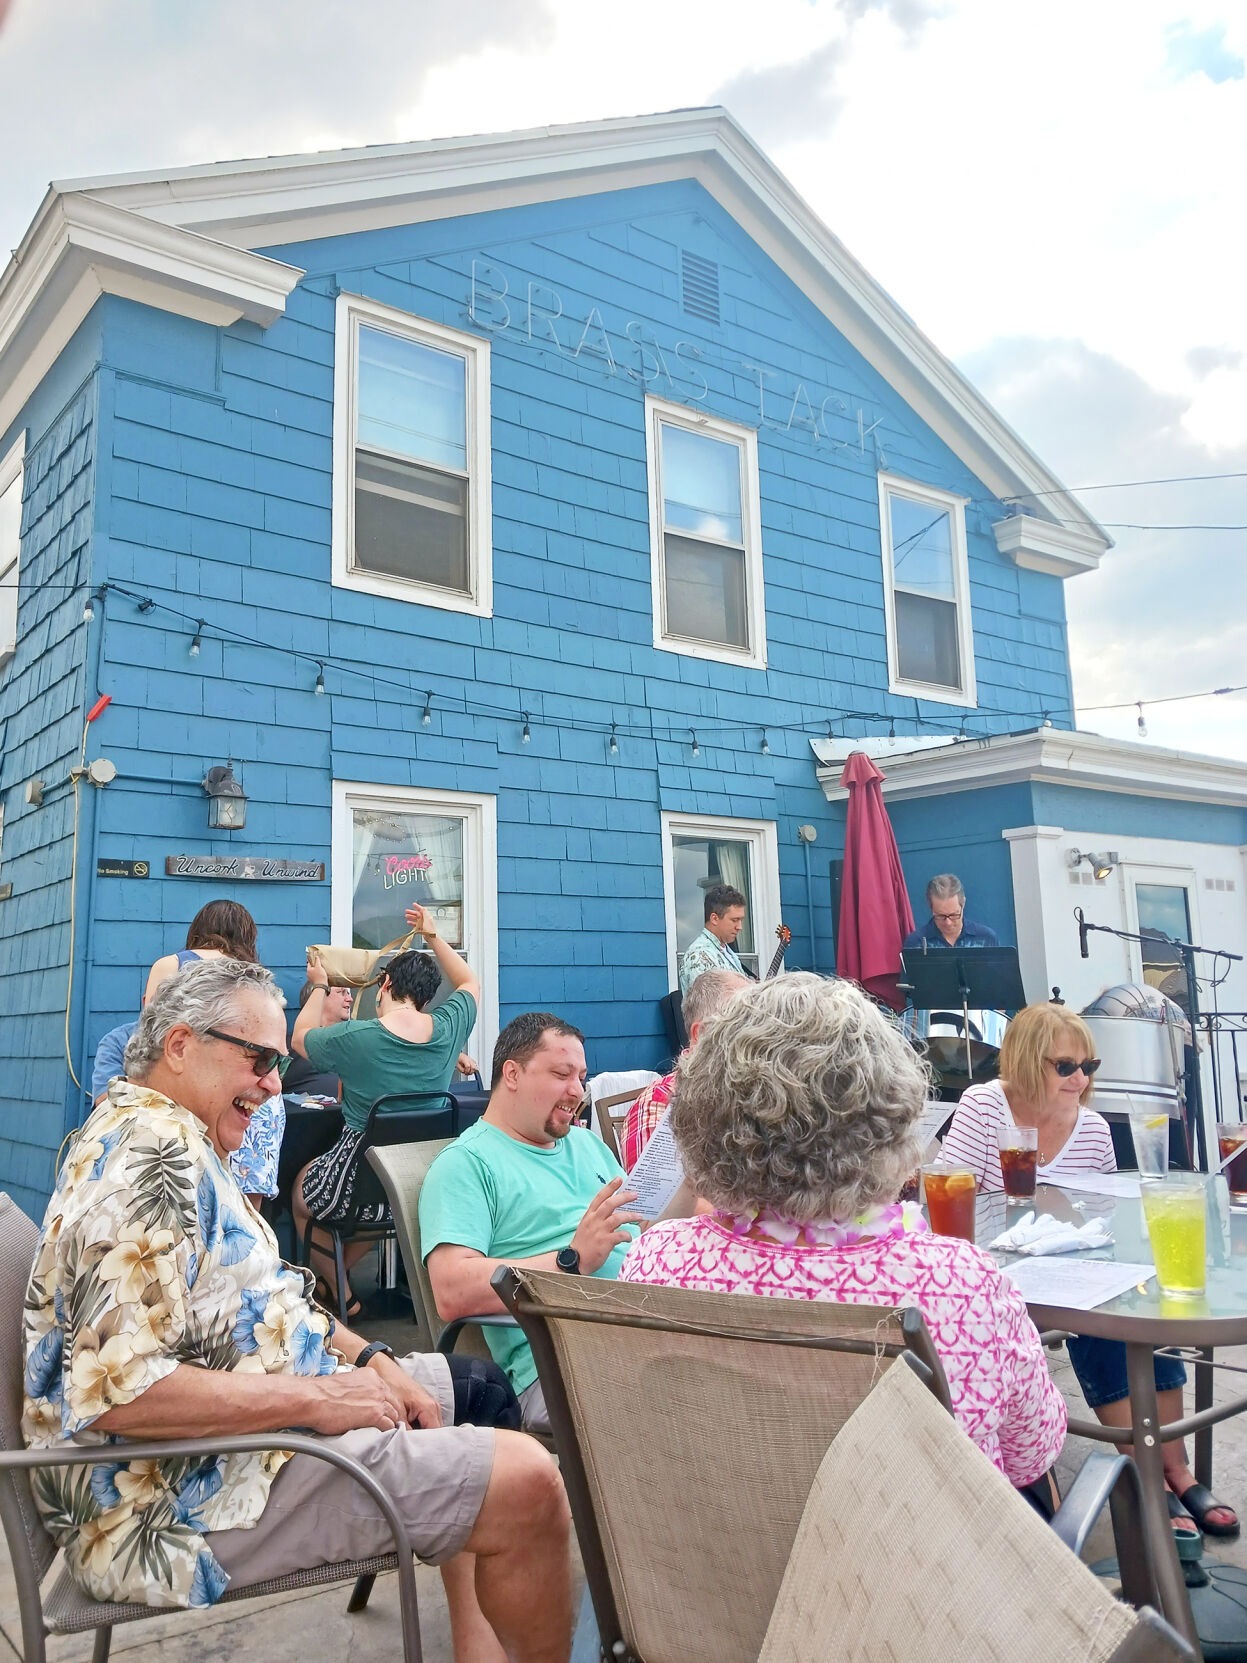 MV Diners, Dives and Drive-ins: Whitey's Brass Tack in Frankfort